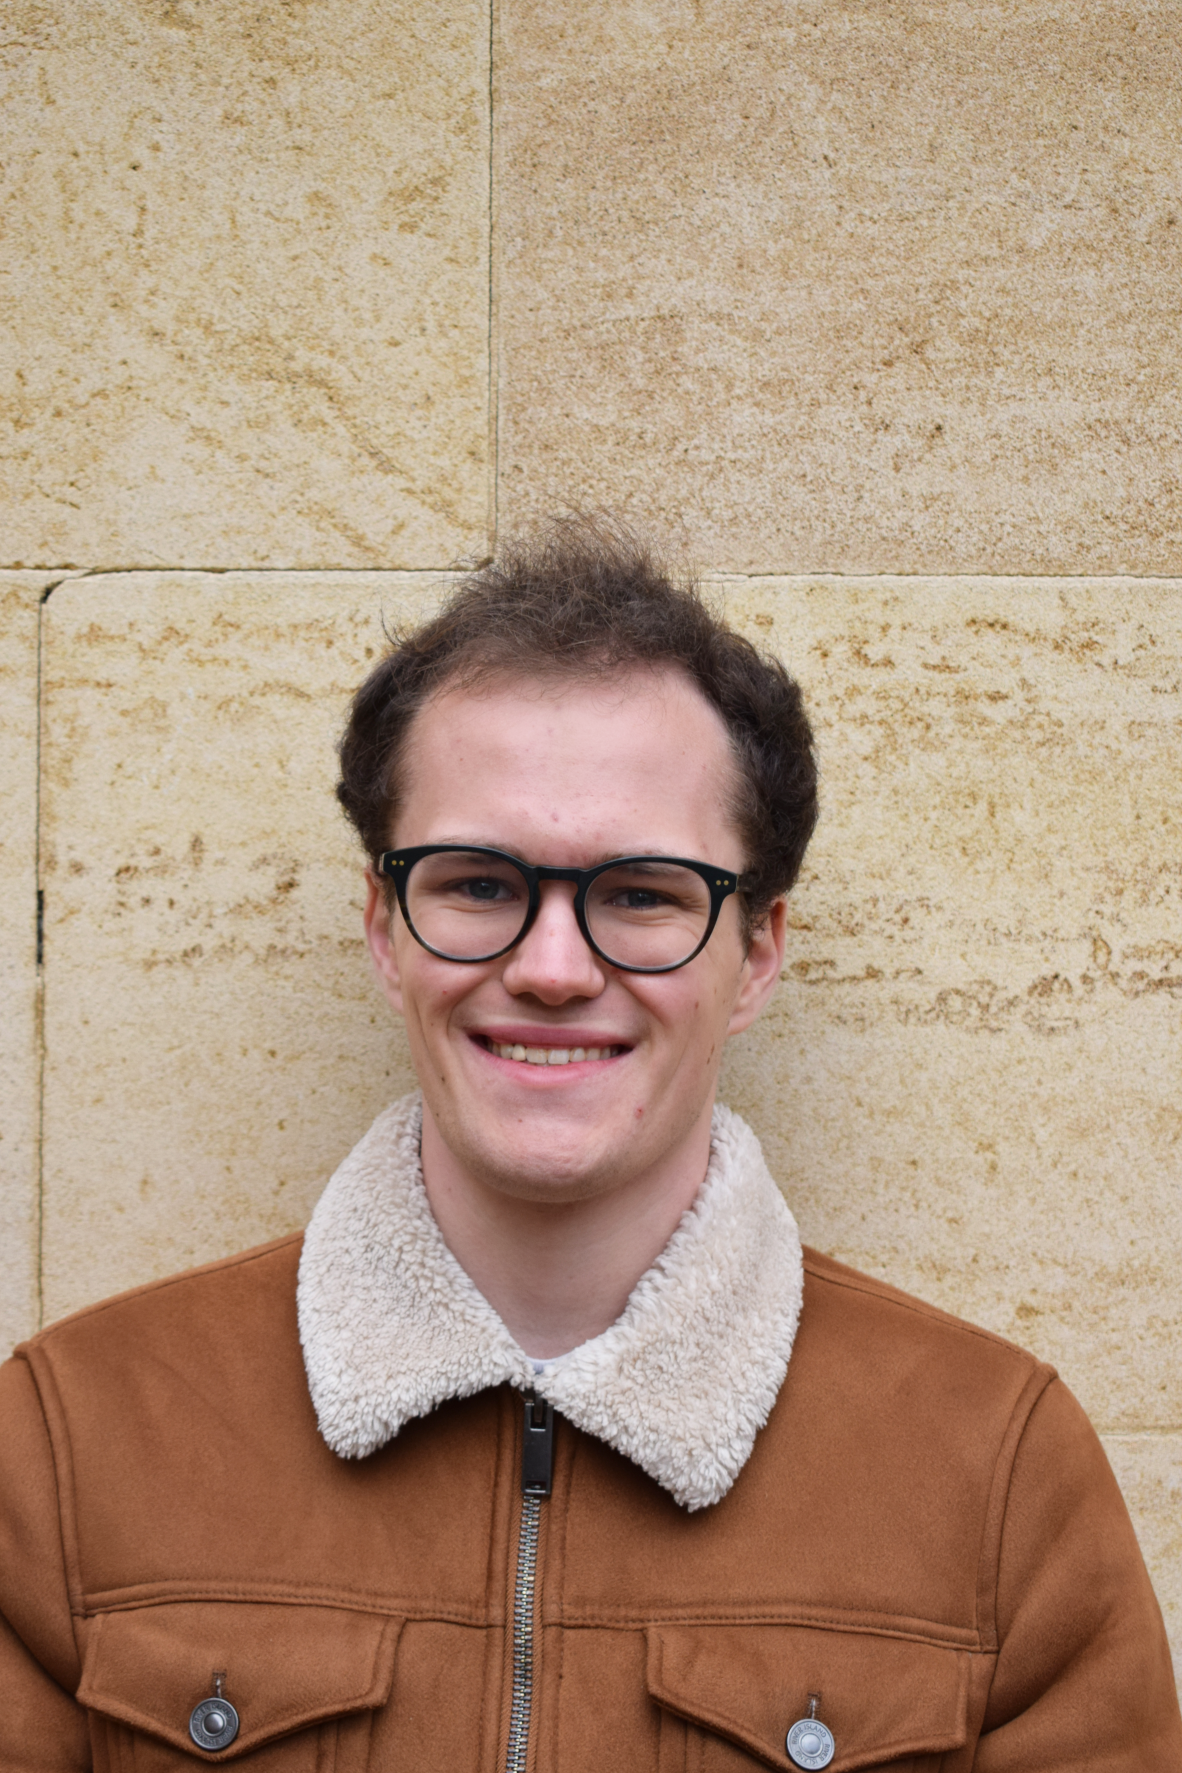 Will, a young cis-gender white man, facing head-on and smiling at the camera. He has short, dark brown hair, glasses, and is wearing a light brown sheepskin coat.